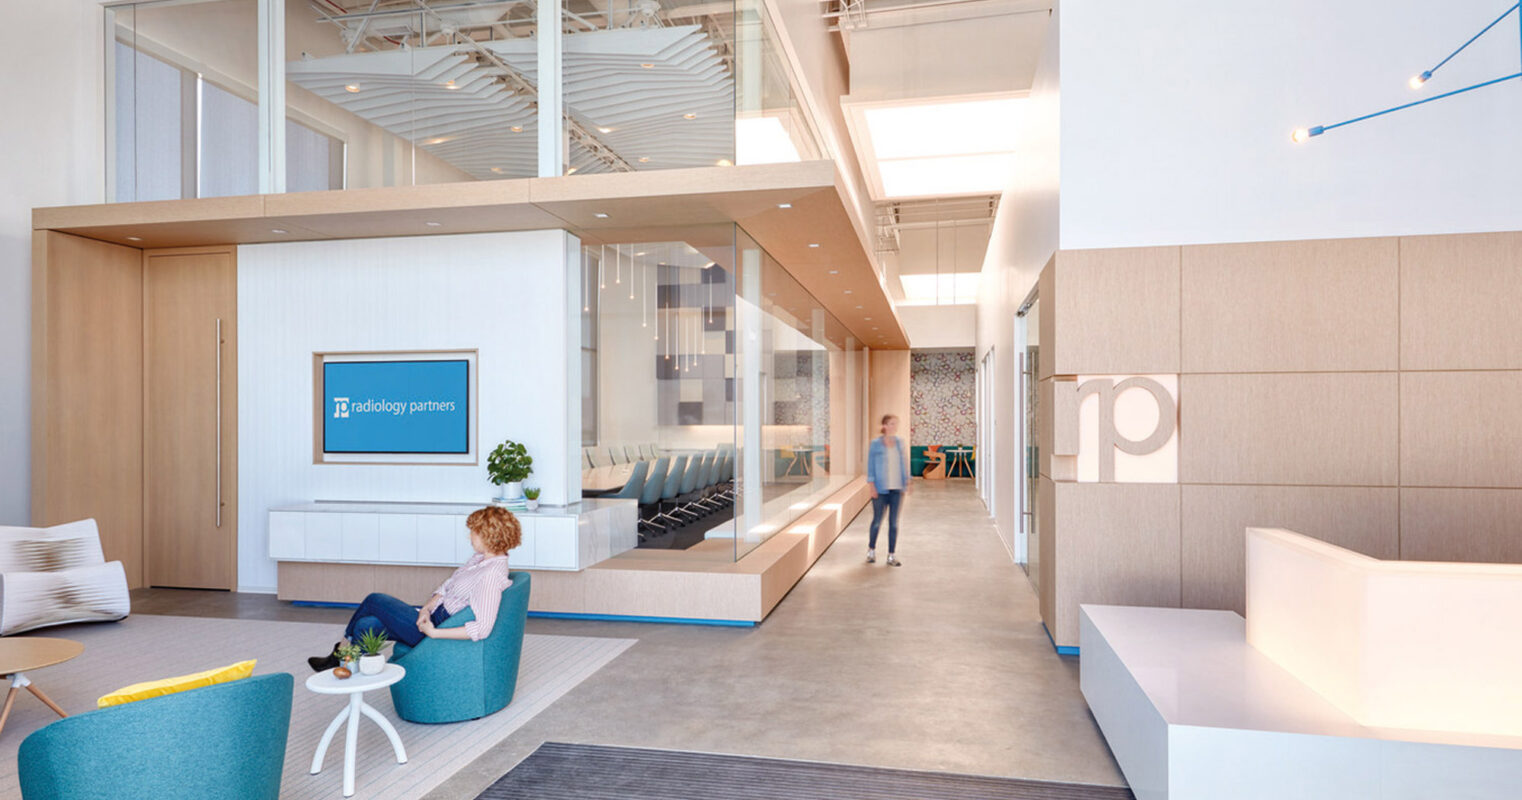 Bright, airy office lobby incorporating a blend of natural and artificial lighting, featuring a minimalist reception desk, contemporary furniture with clean lines, and a calm color palette accented by pops of blue. Textured elements add depth to the open-concept space.